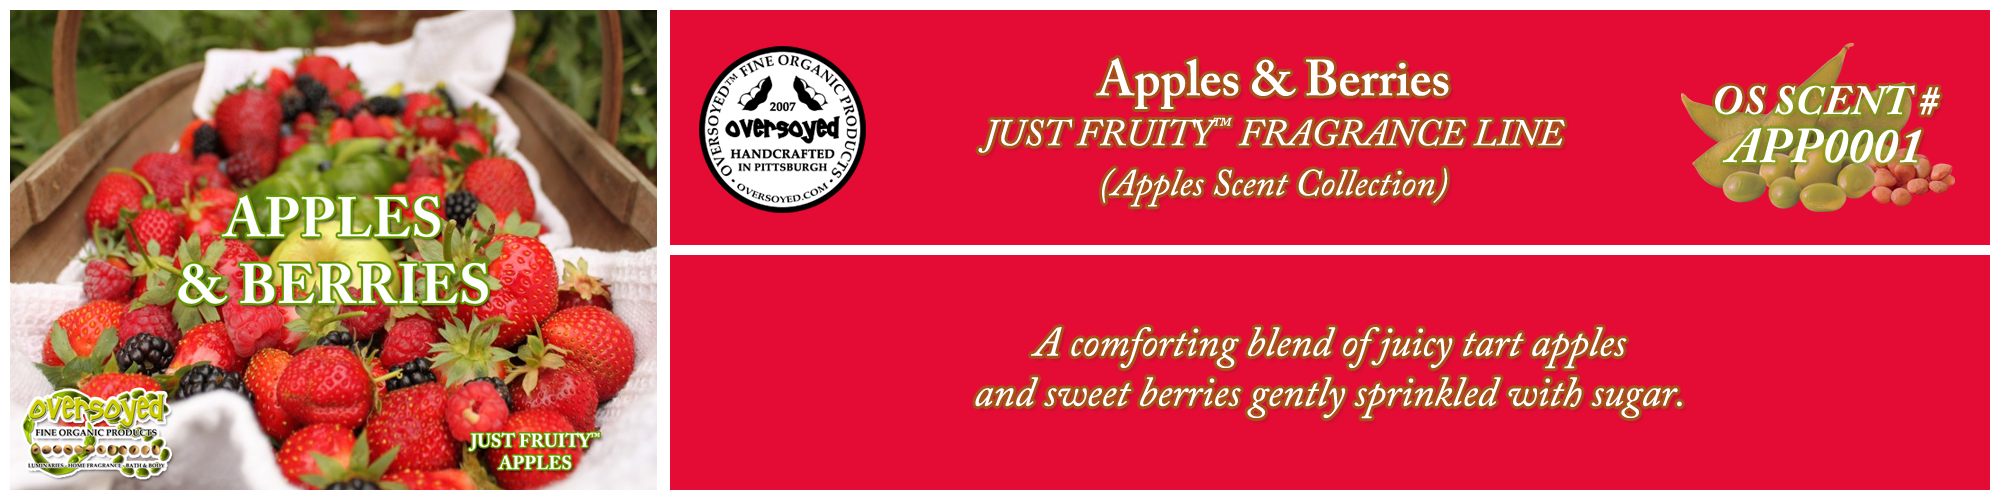 Apples & Berries Handcrafted Products Collection